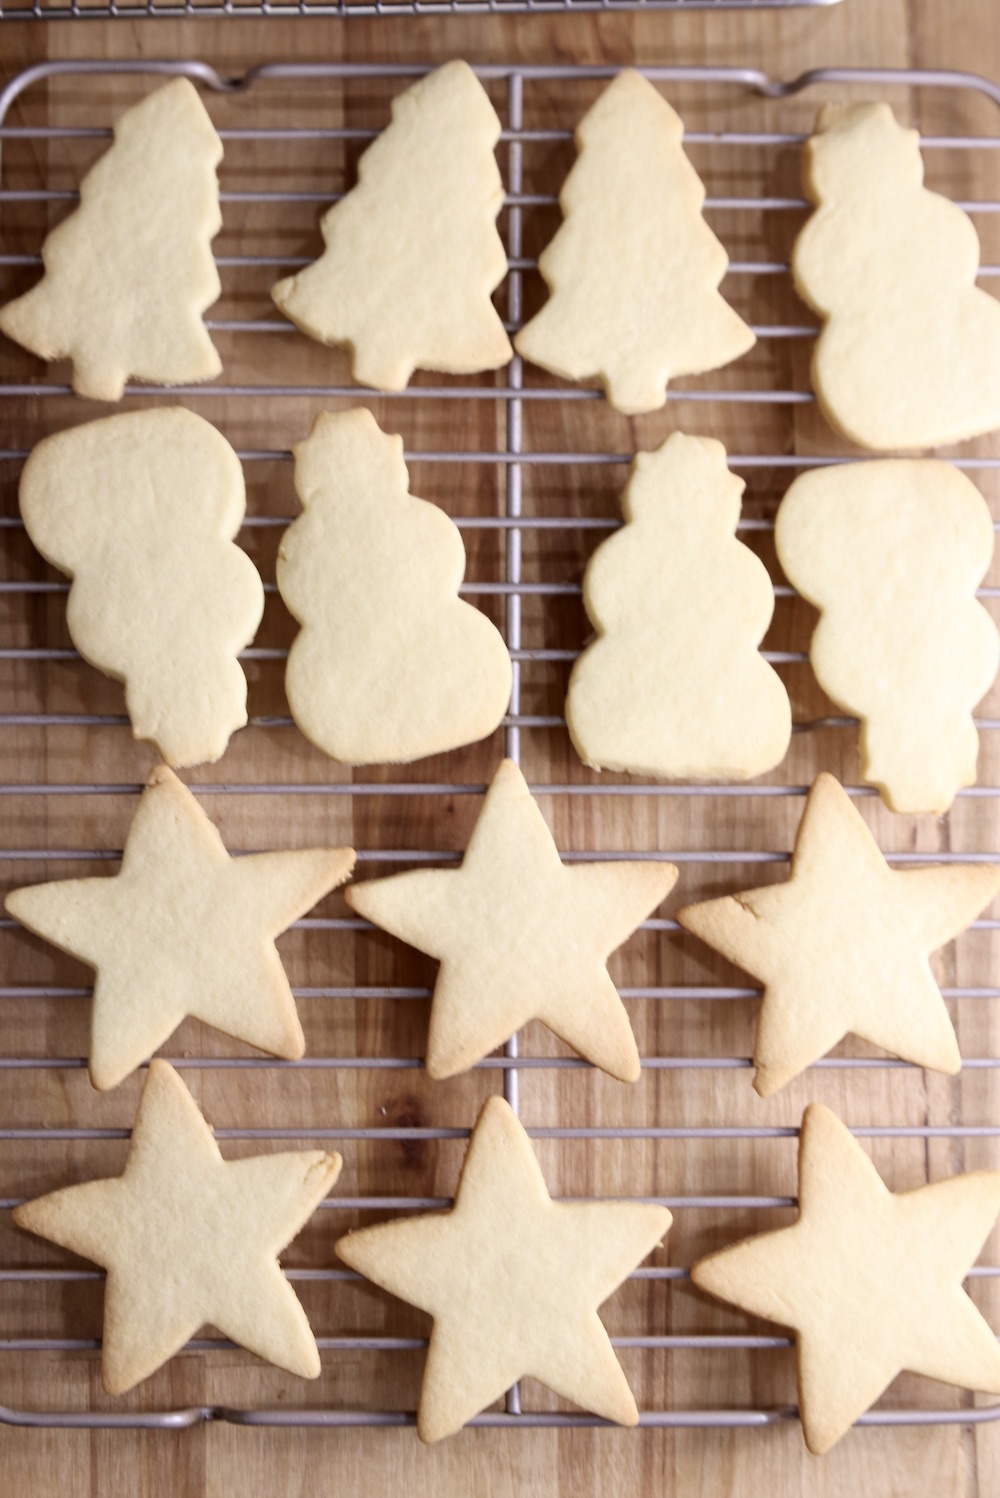 Wire rack of cut out sugar cookies. Trees, snowmen, stars.